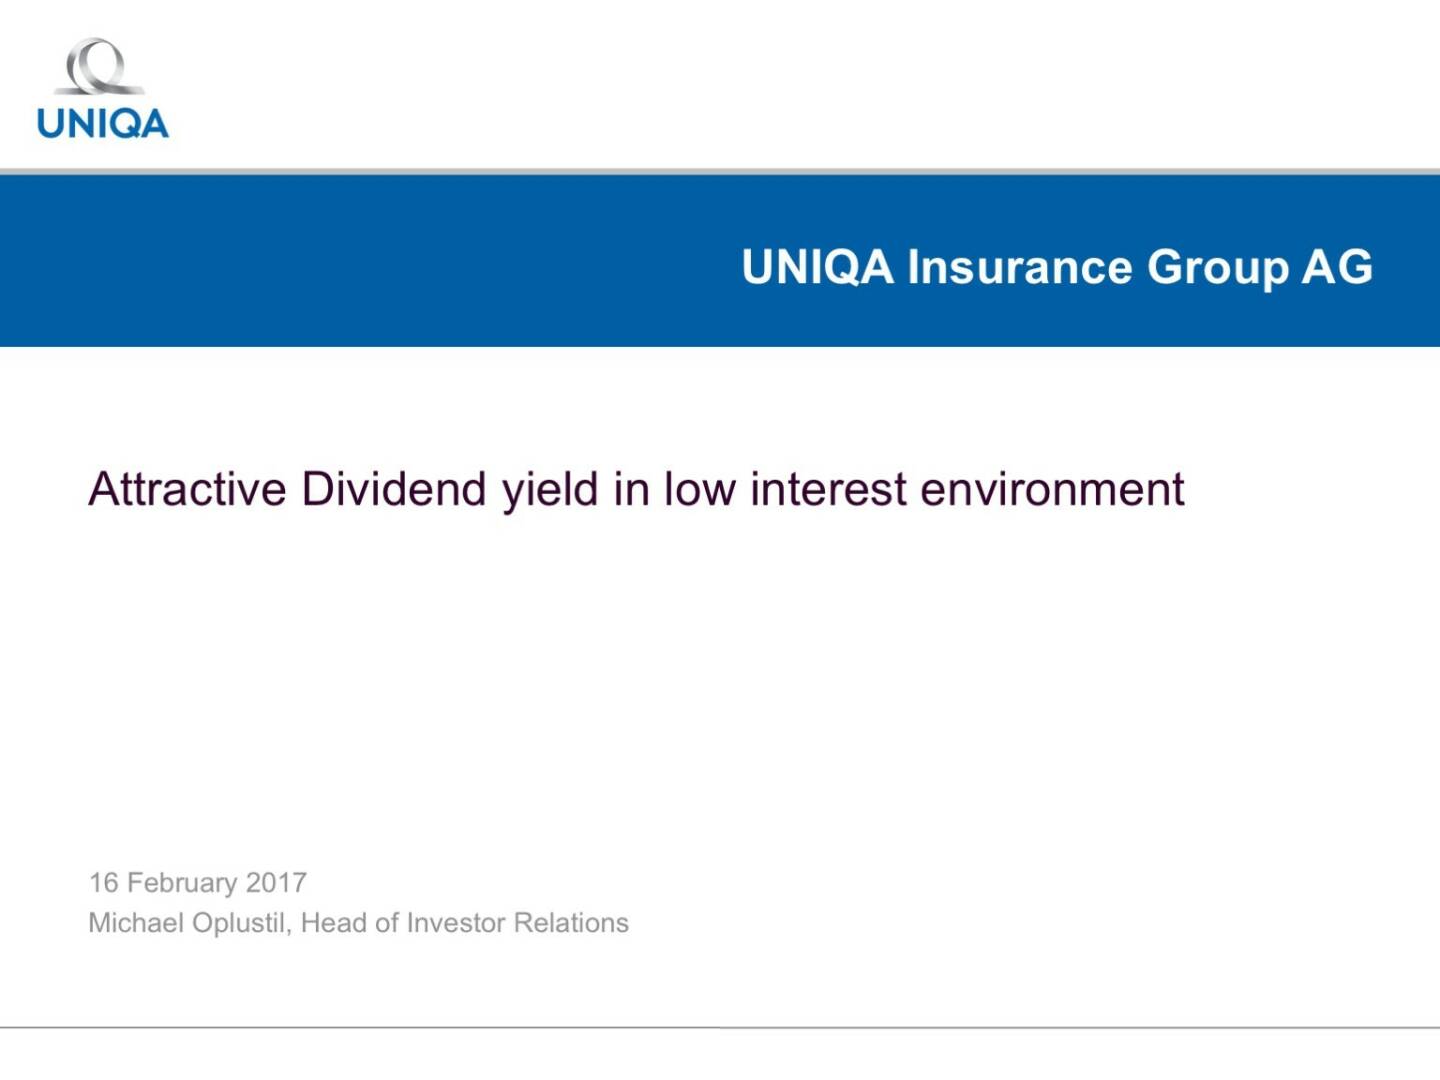 Uniqa - Attractive Dividend yield in low interest environment